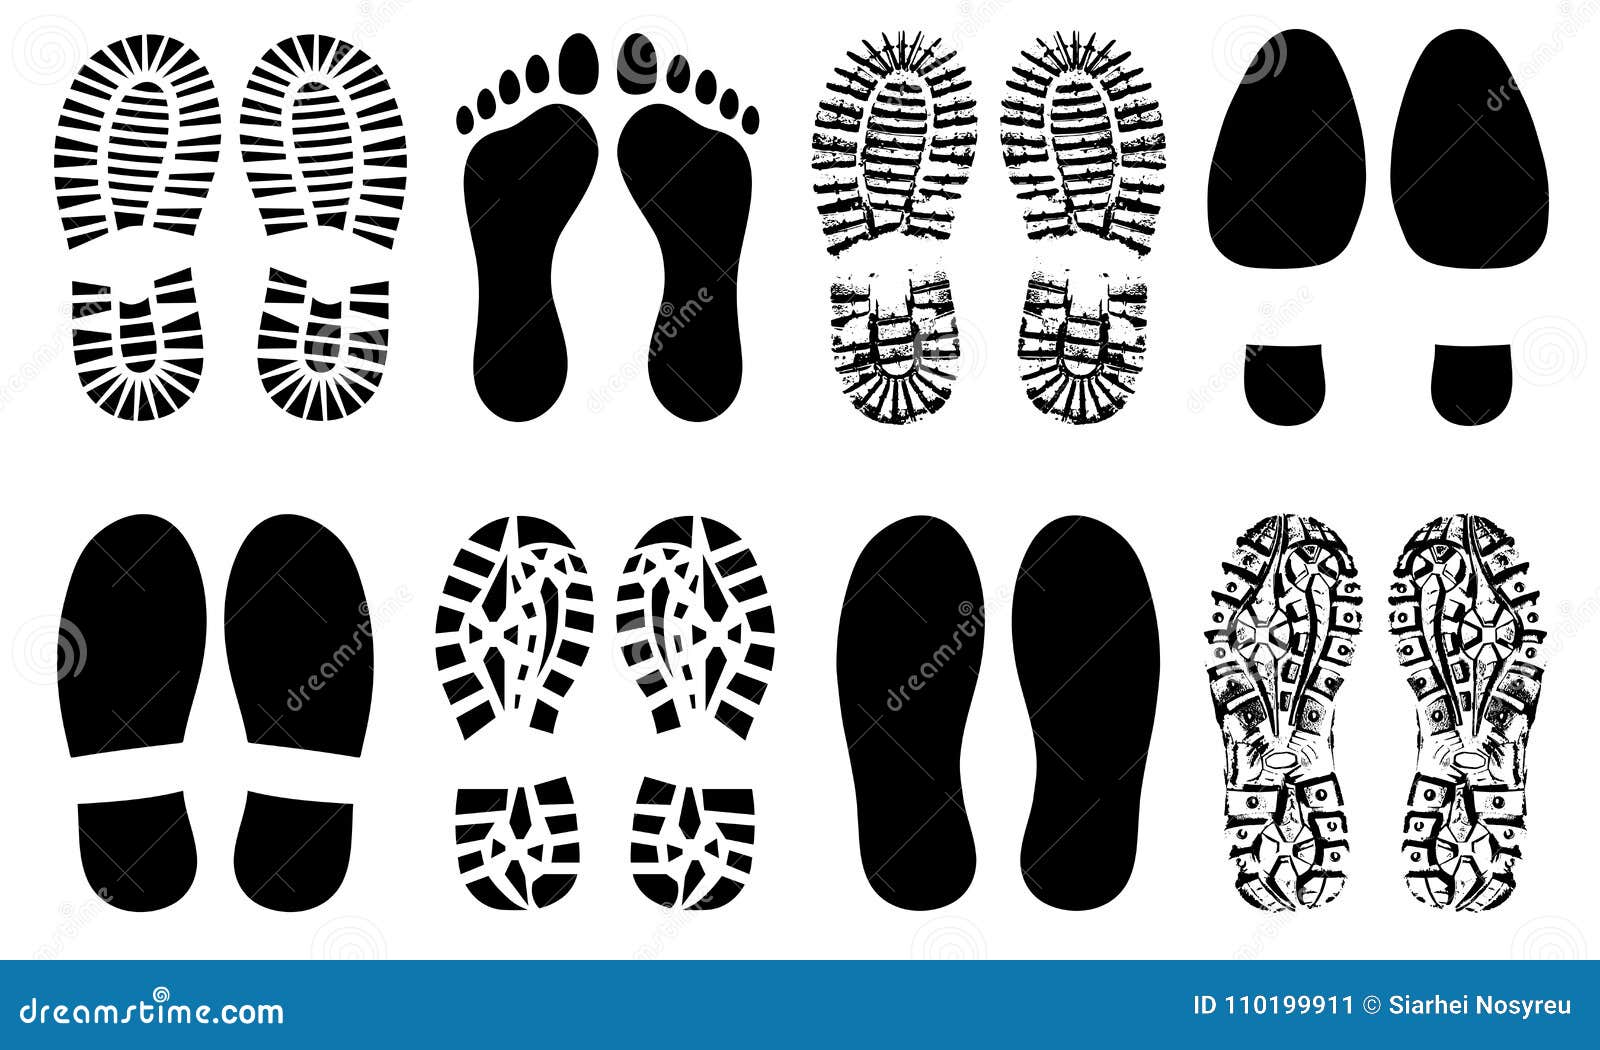 Shoe Sole, Foot Feet, Footprints Human Shoes Silhouette Vector. Stock ...